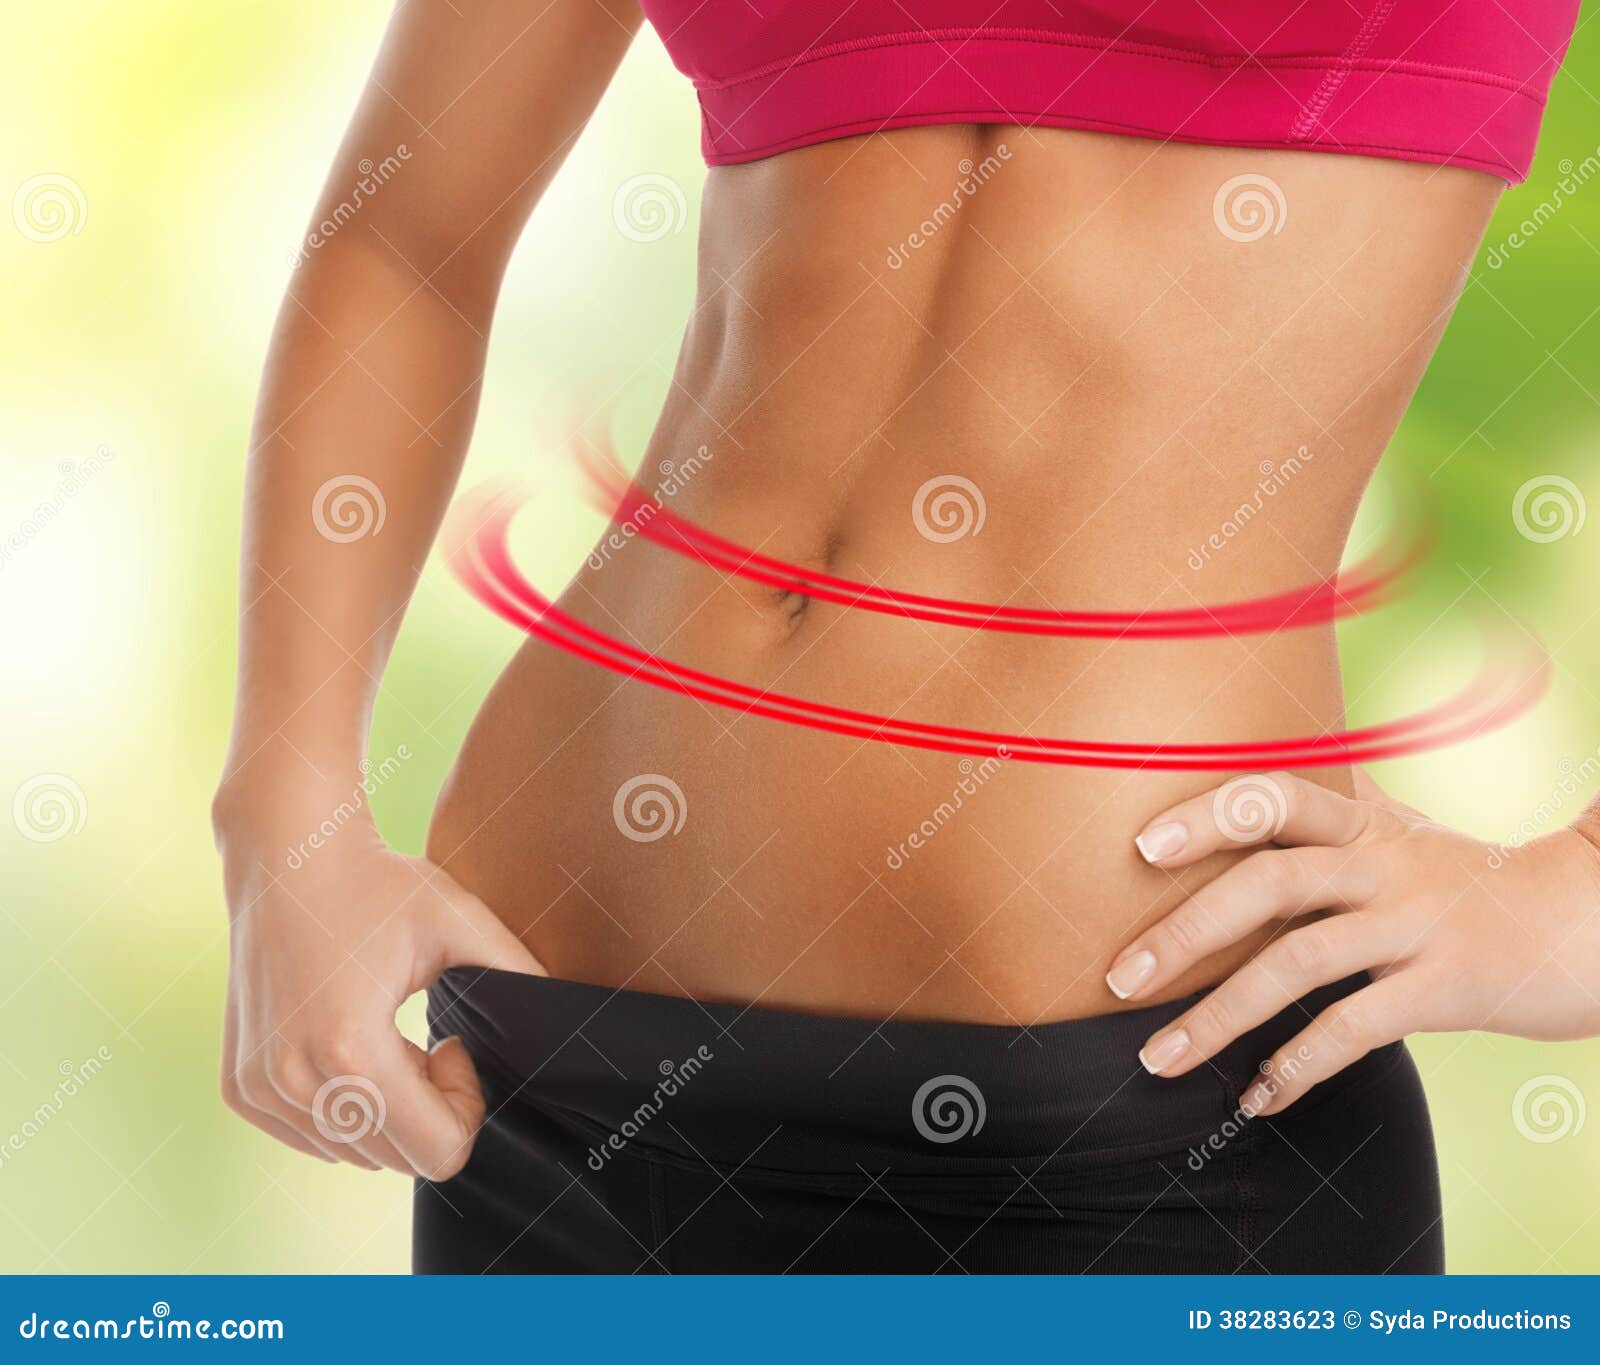 woman trained abs